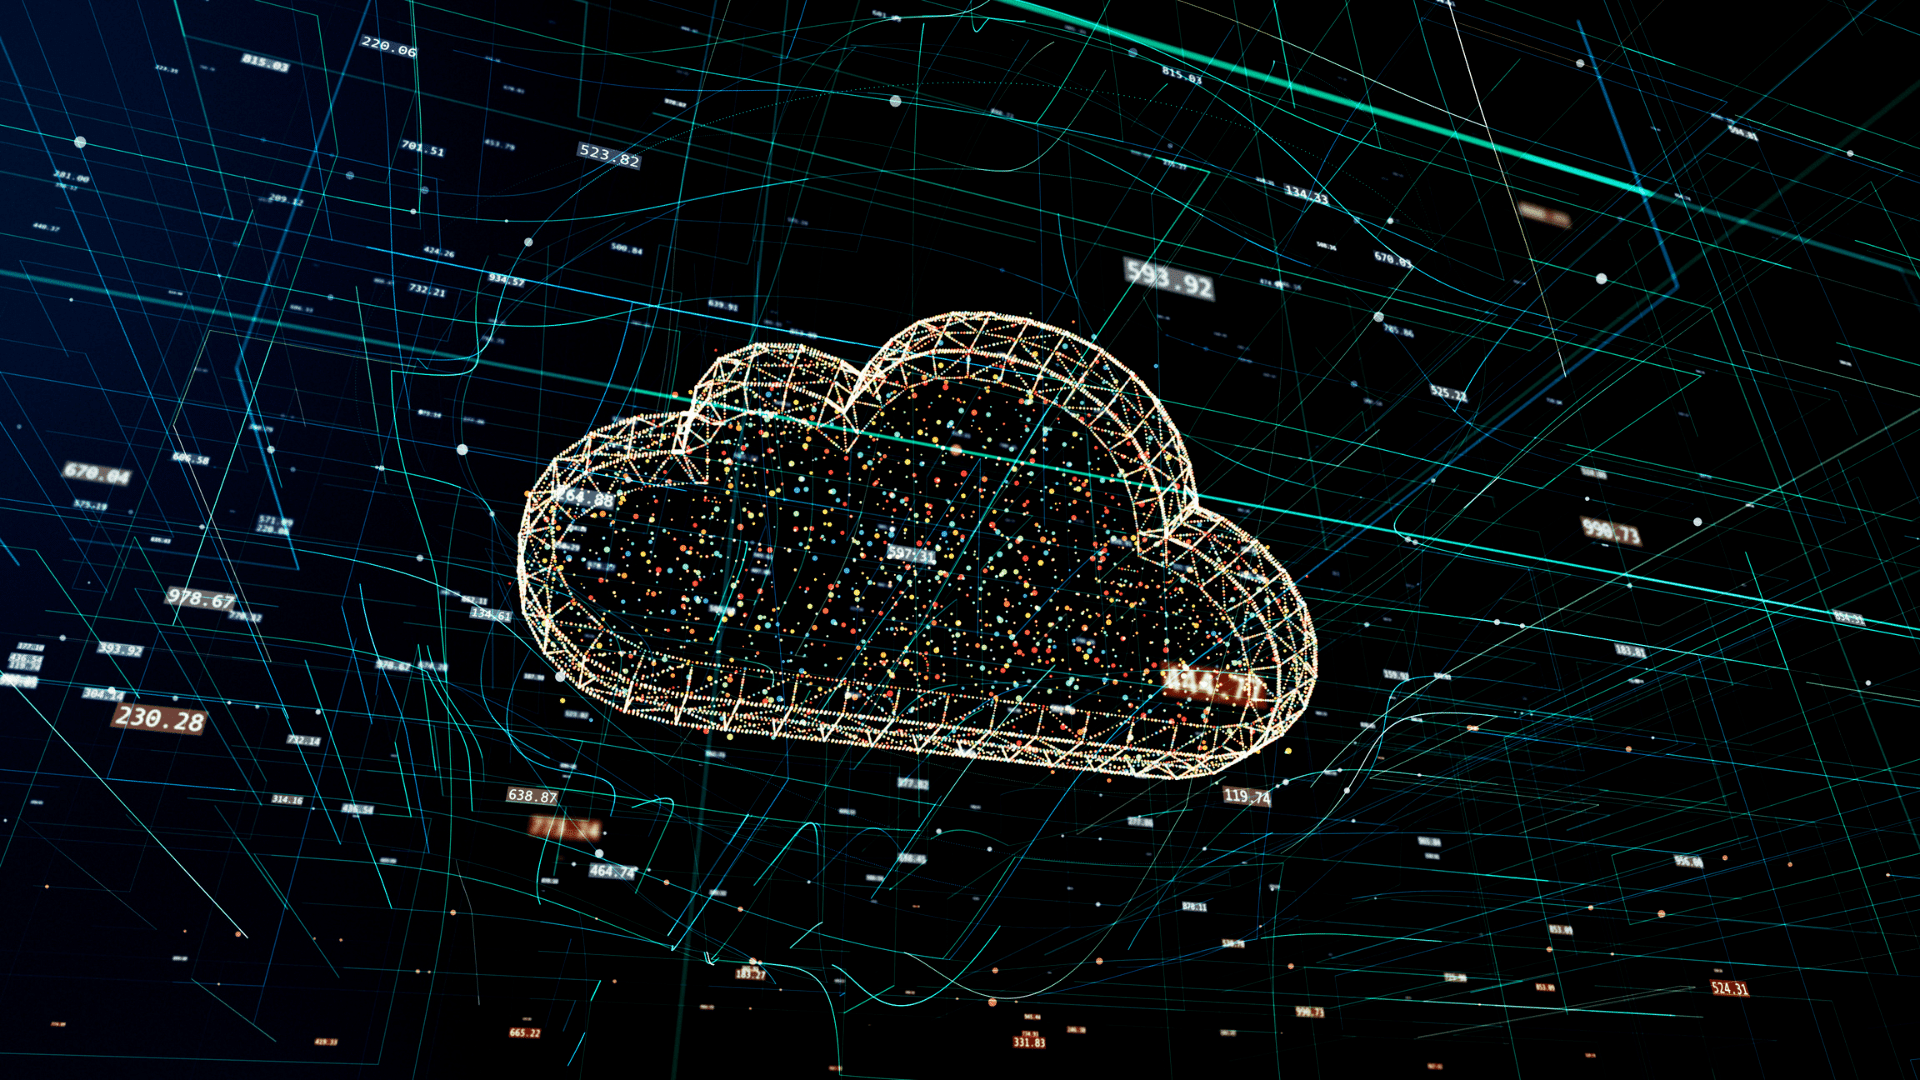 A cloud in the middle of a network of dots.